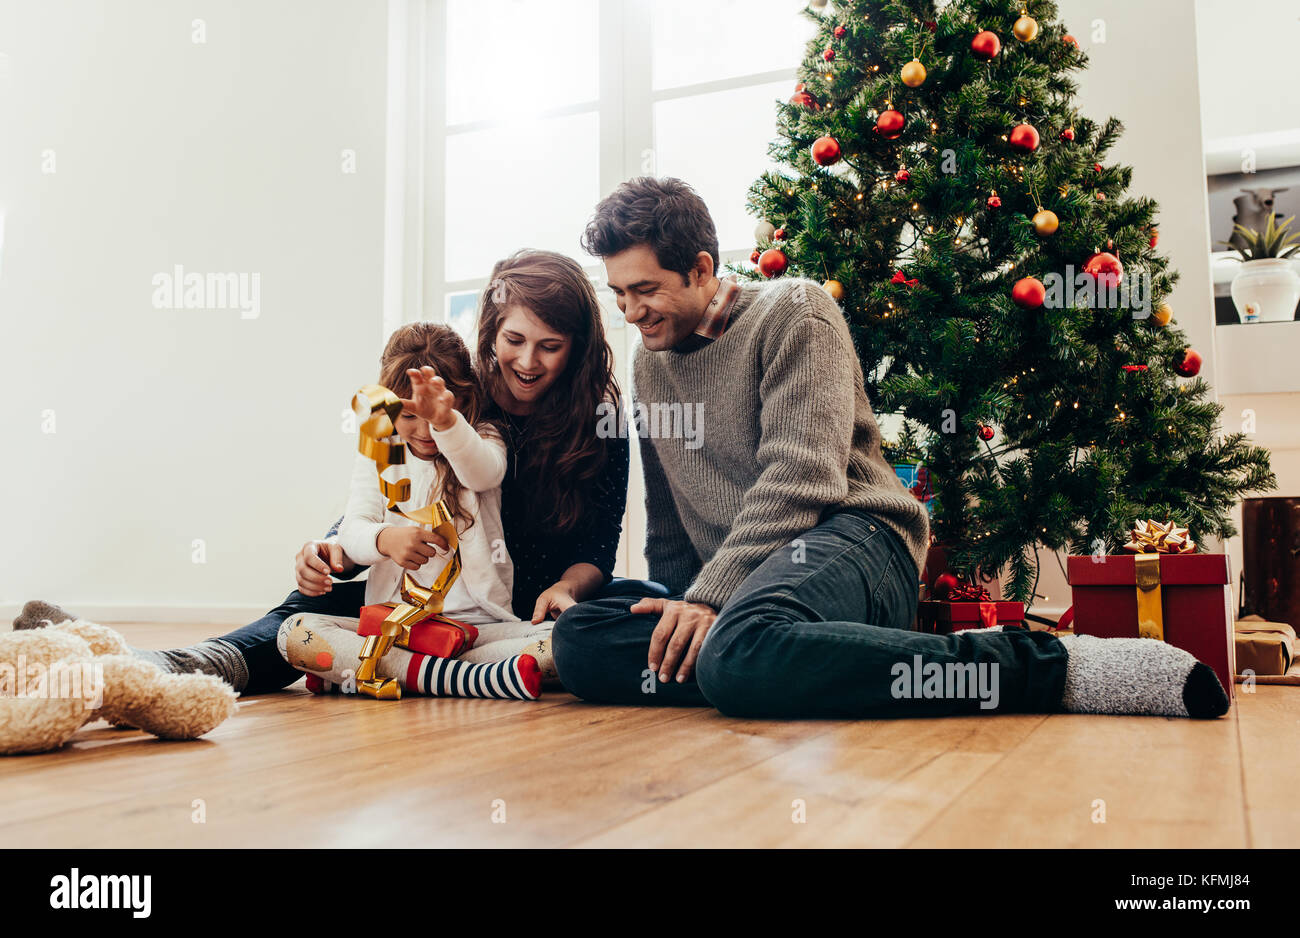 Small family having happy time together on Christmas. Young couple with child sitting beside Christmas tree opening gifts. Stock Photo